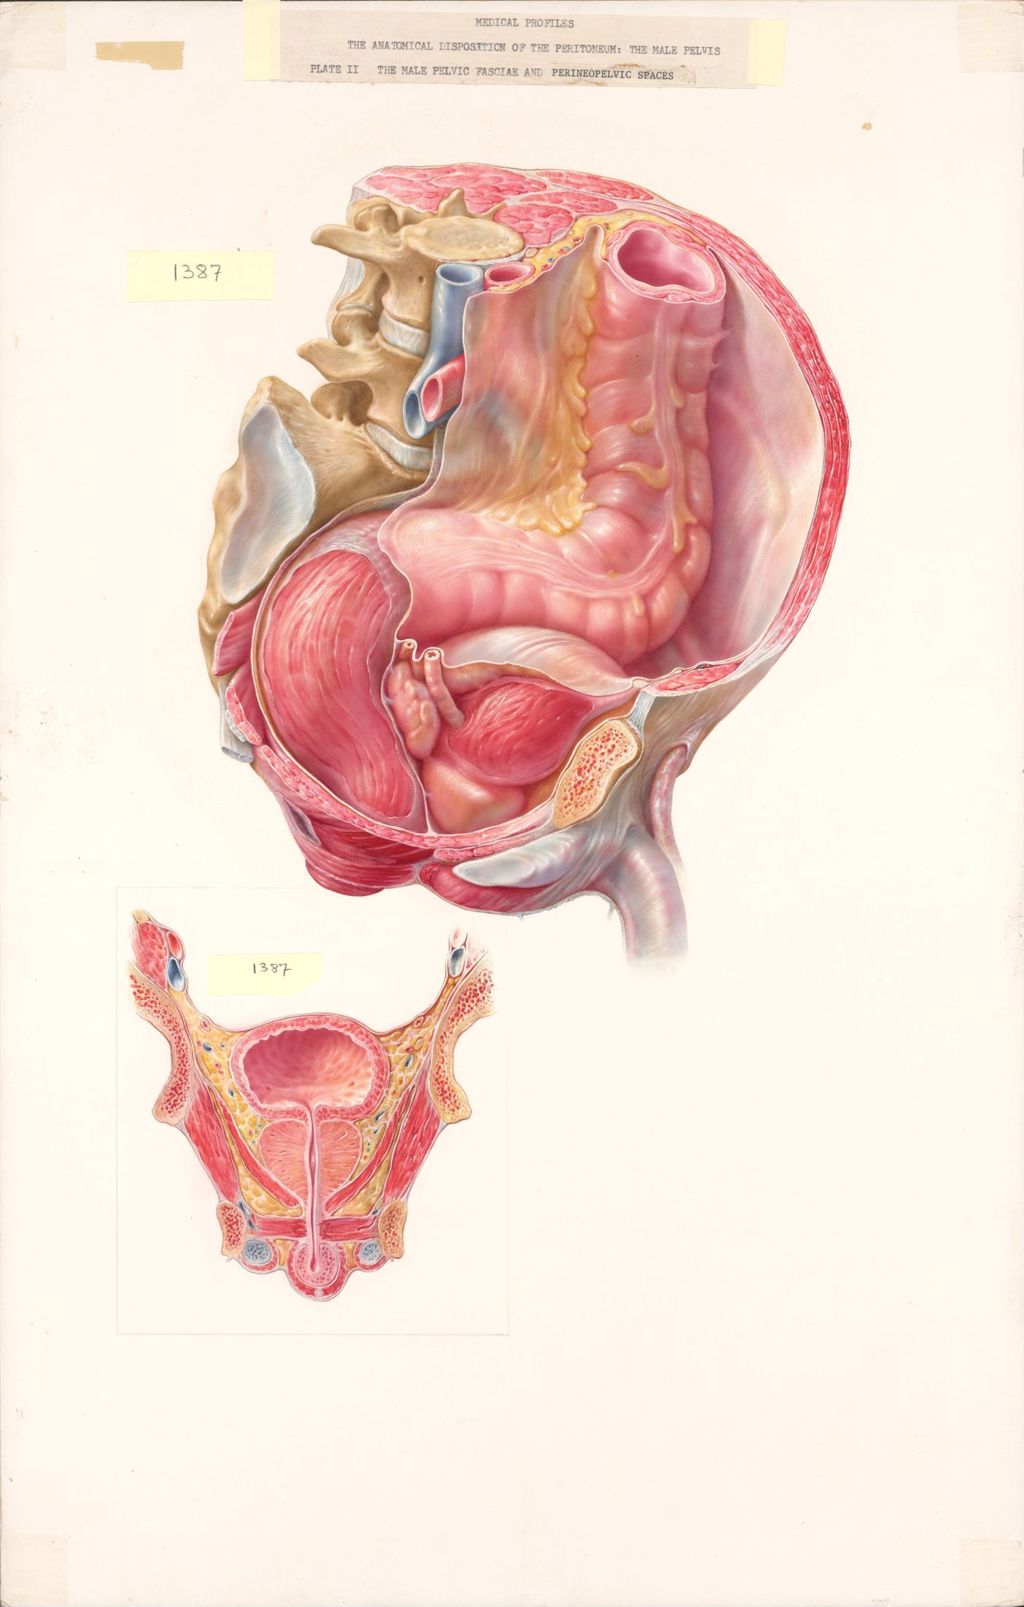 Medical Profiles, The Anatomical Disposition of the Peritoneum, The Male Pelvis, Plate II, The Male Pelvic Fasciae and Perineopelvic Spaces